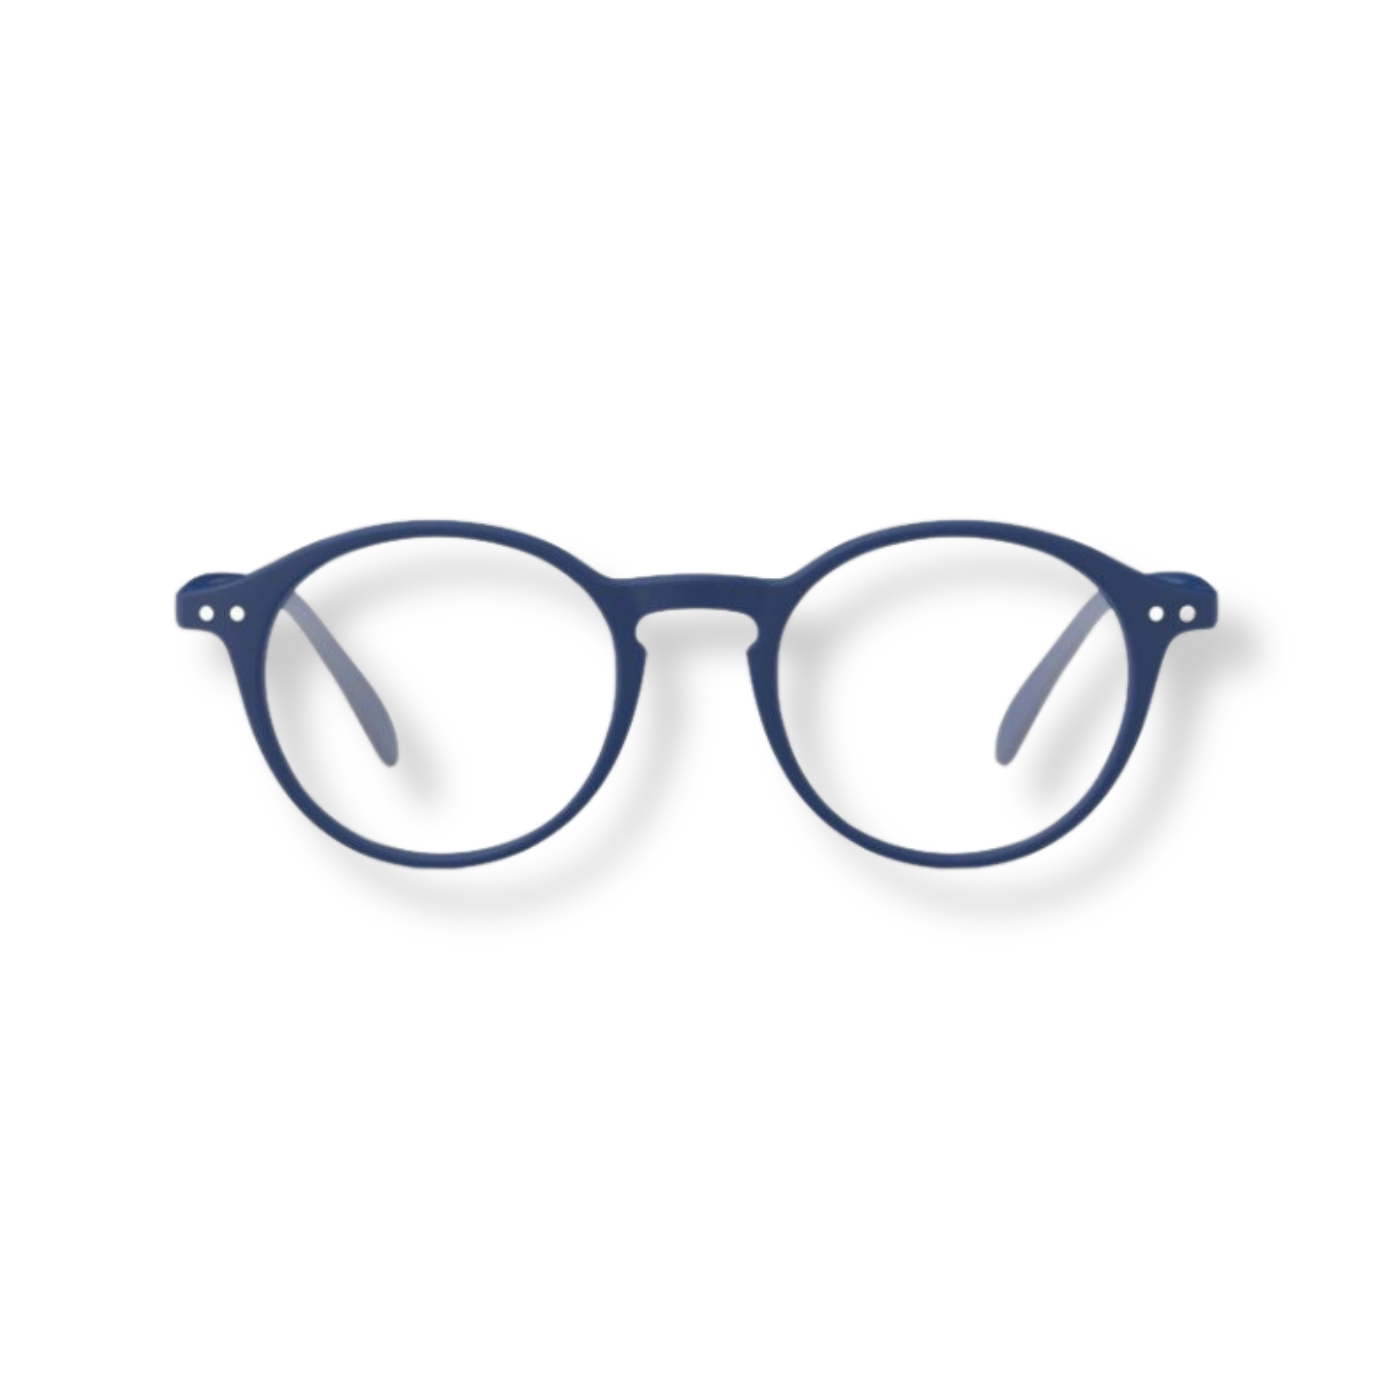 Round reading glasses with a navy blue frame.